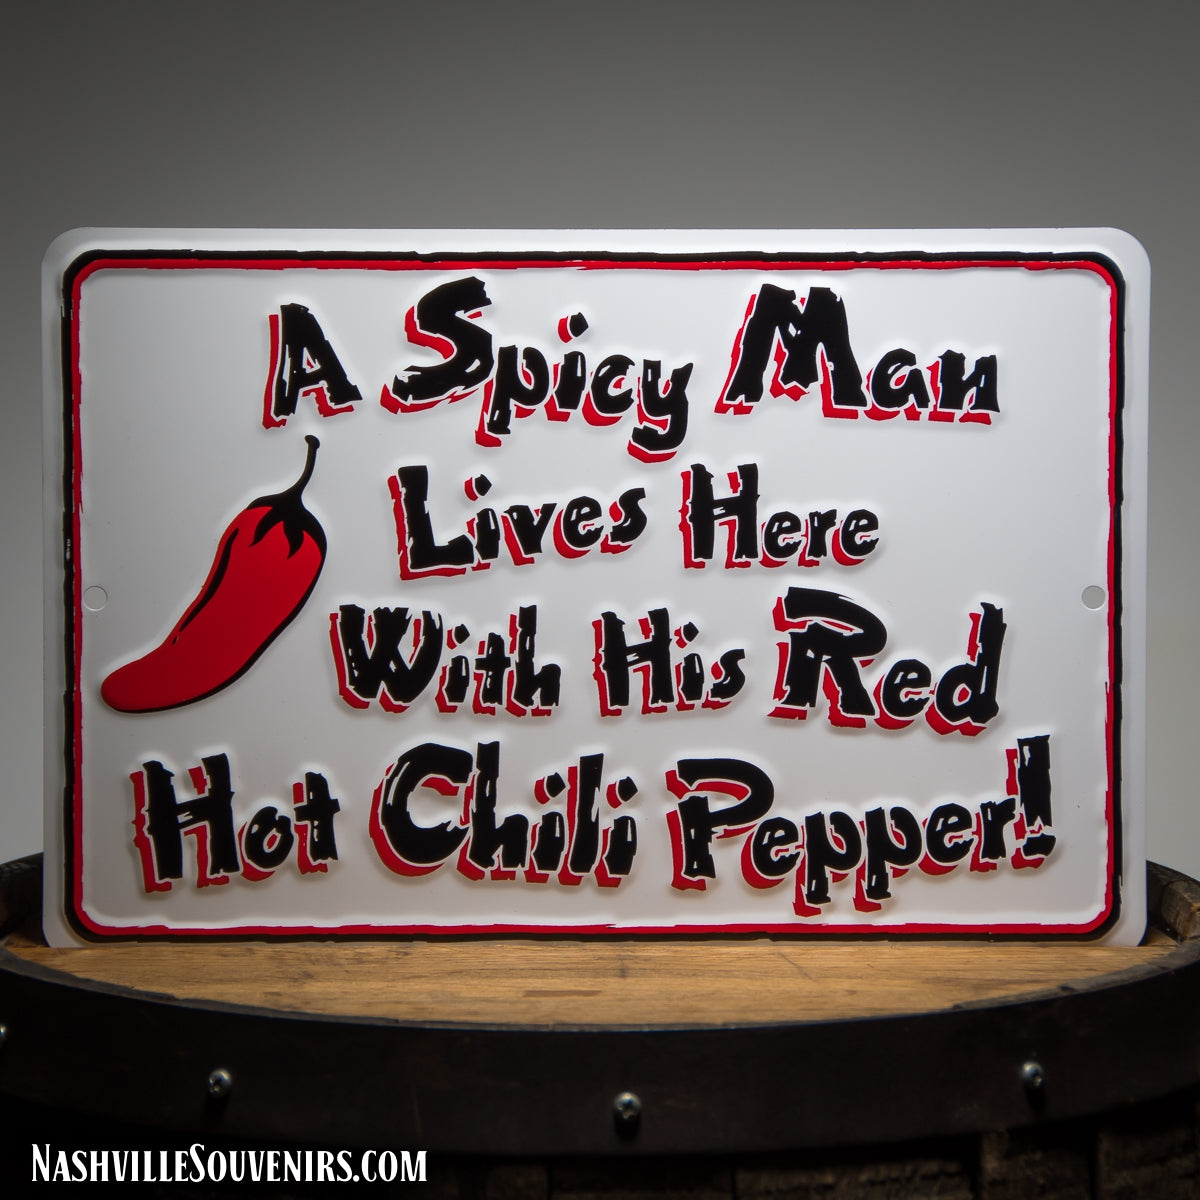 A Spicy Man Lives Here with his Red Hot Chili Pepper!